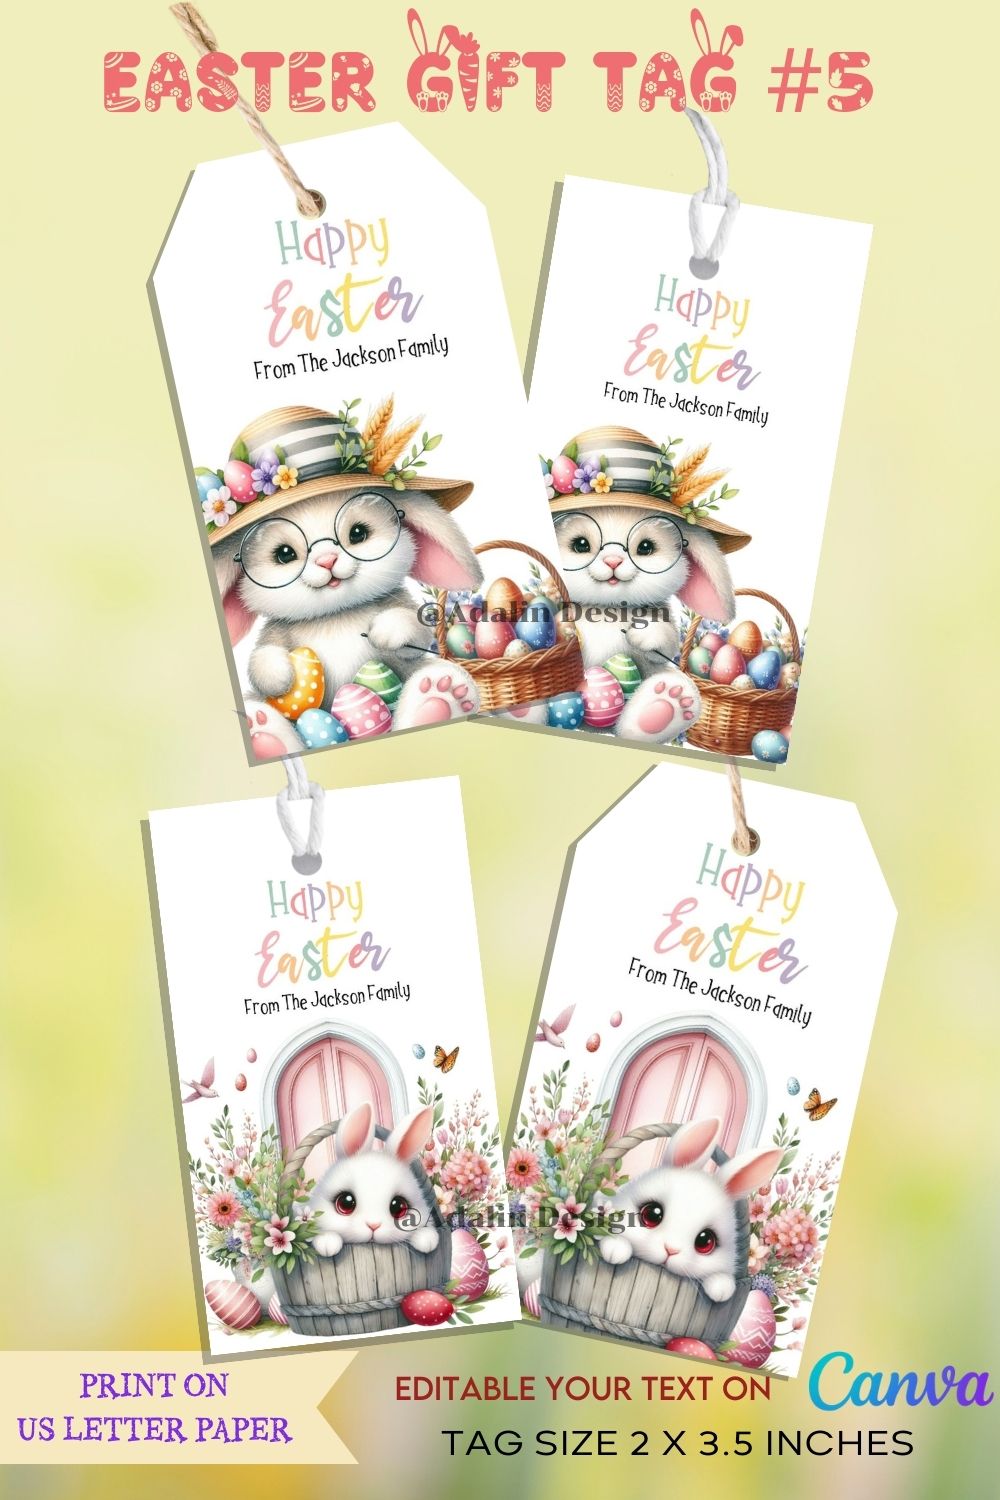 Easter Gift Tags #5 pinterest preview image.